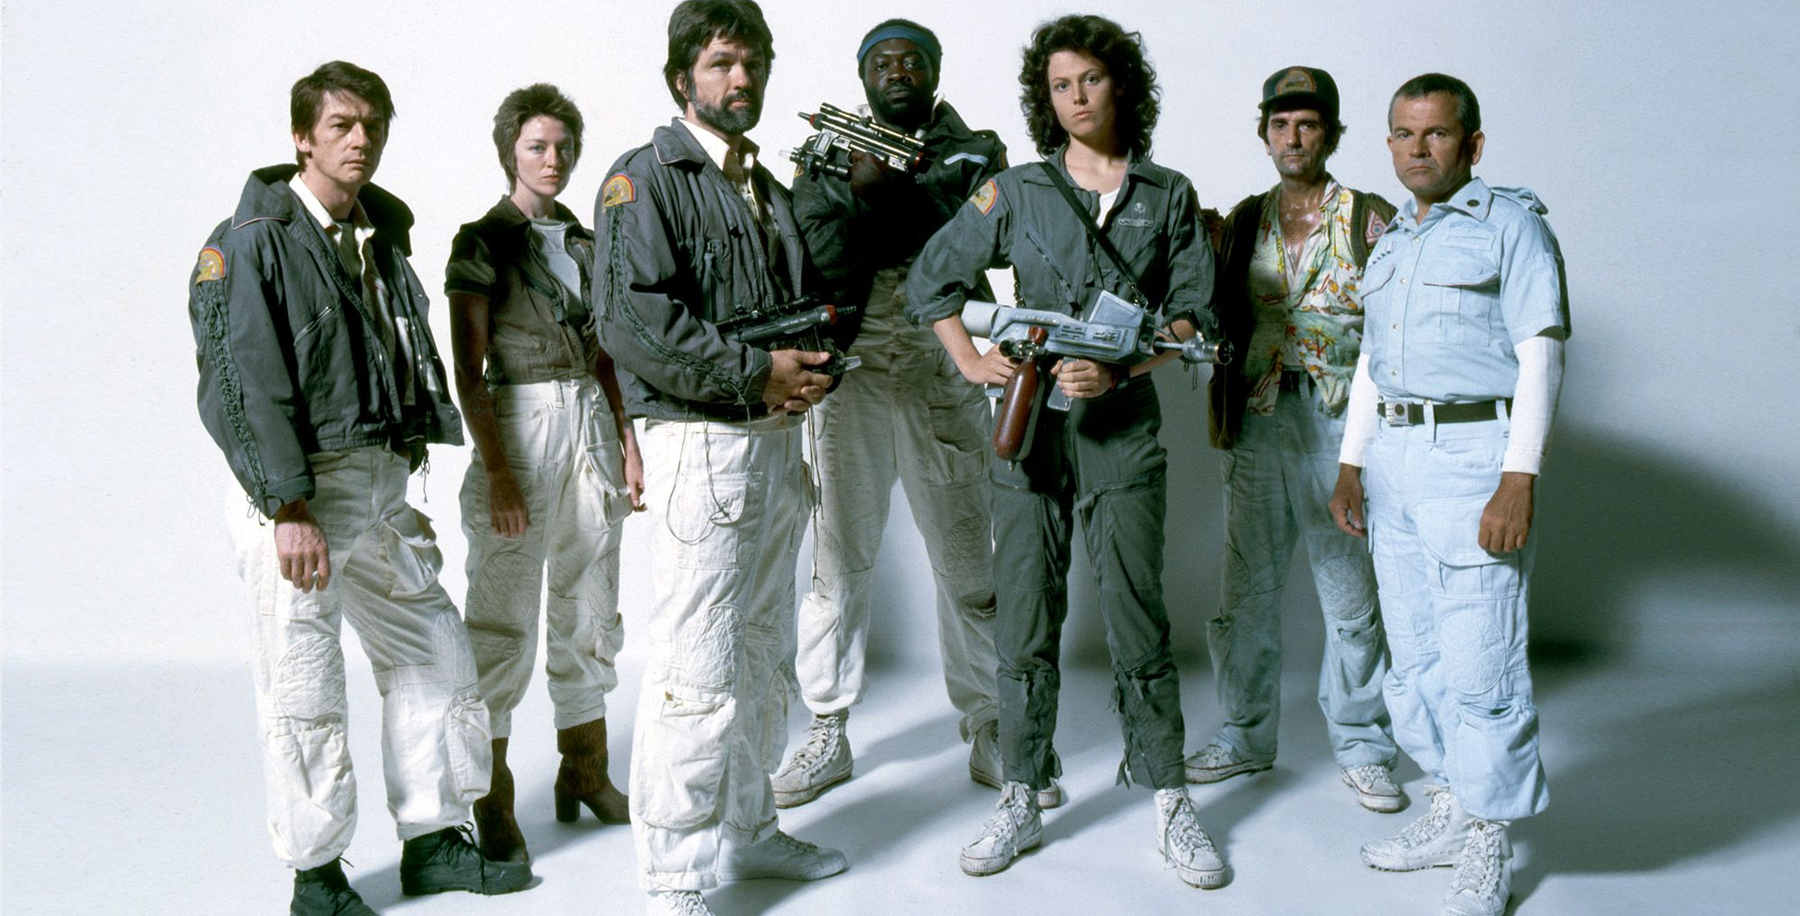 The crew of the USCSS Nostromo commercial towing vehicle, Kane, Parker, Dallas, Brett, Ripley, Brett and Ash.